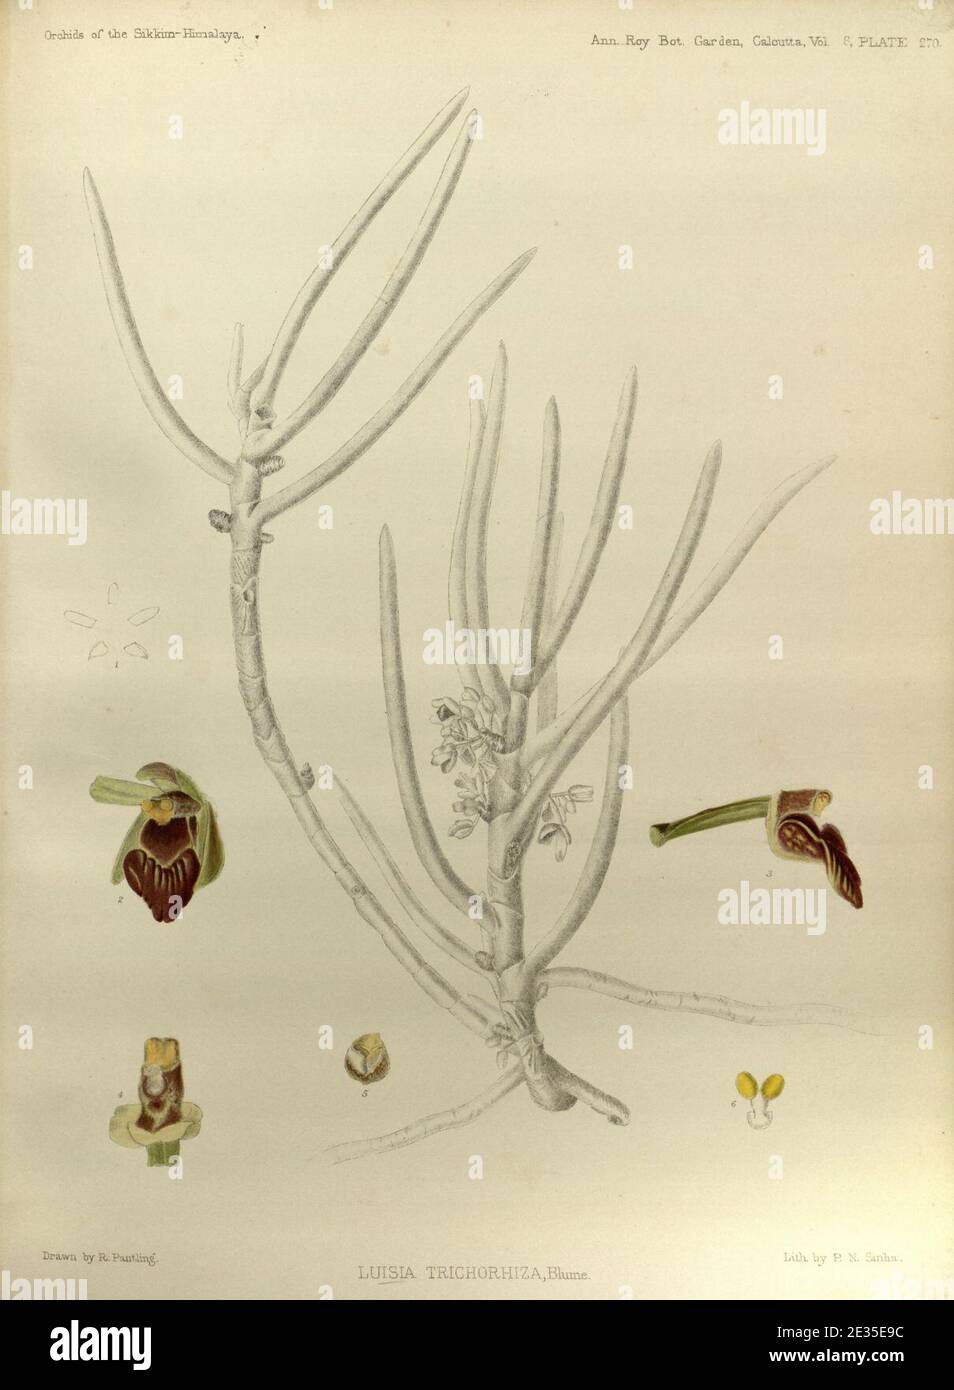 Luisia trichorrhiza - The Orchids of the Sikkim-Himalaya pl 270 (1898). Stock Photo